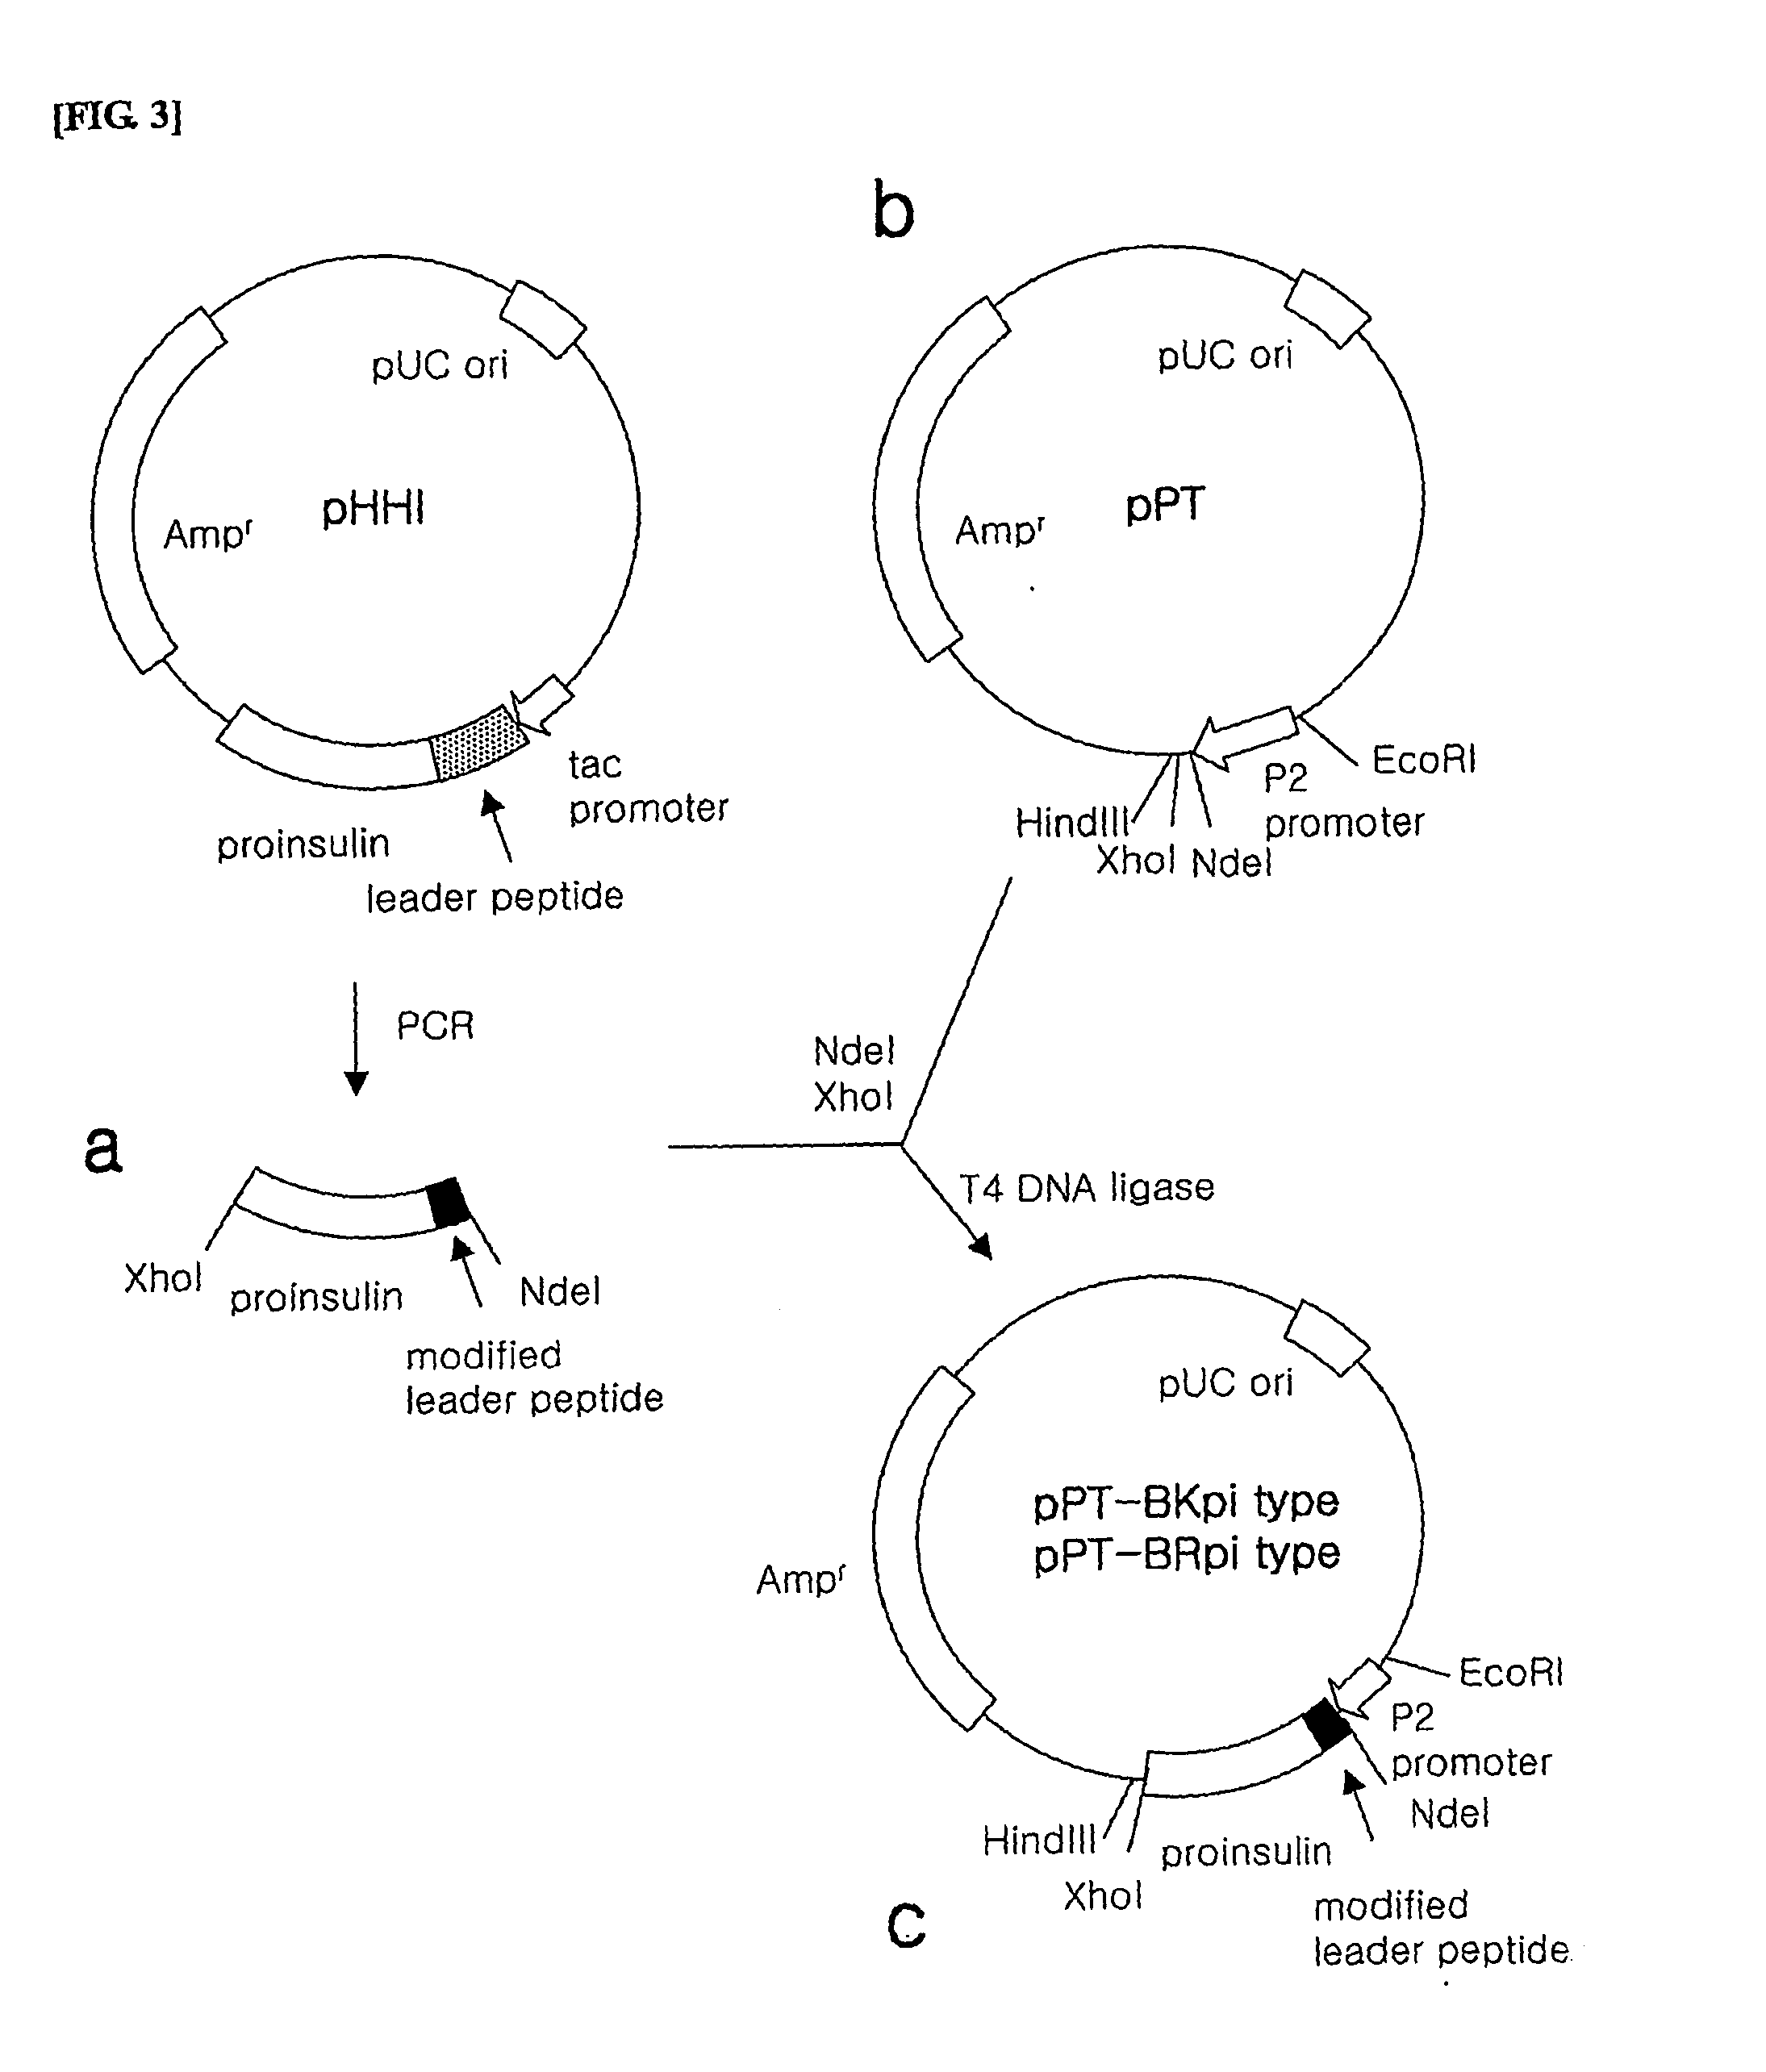 Plasmids expressing human insulin and the preparation method for human insuling thereby